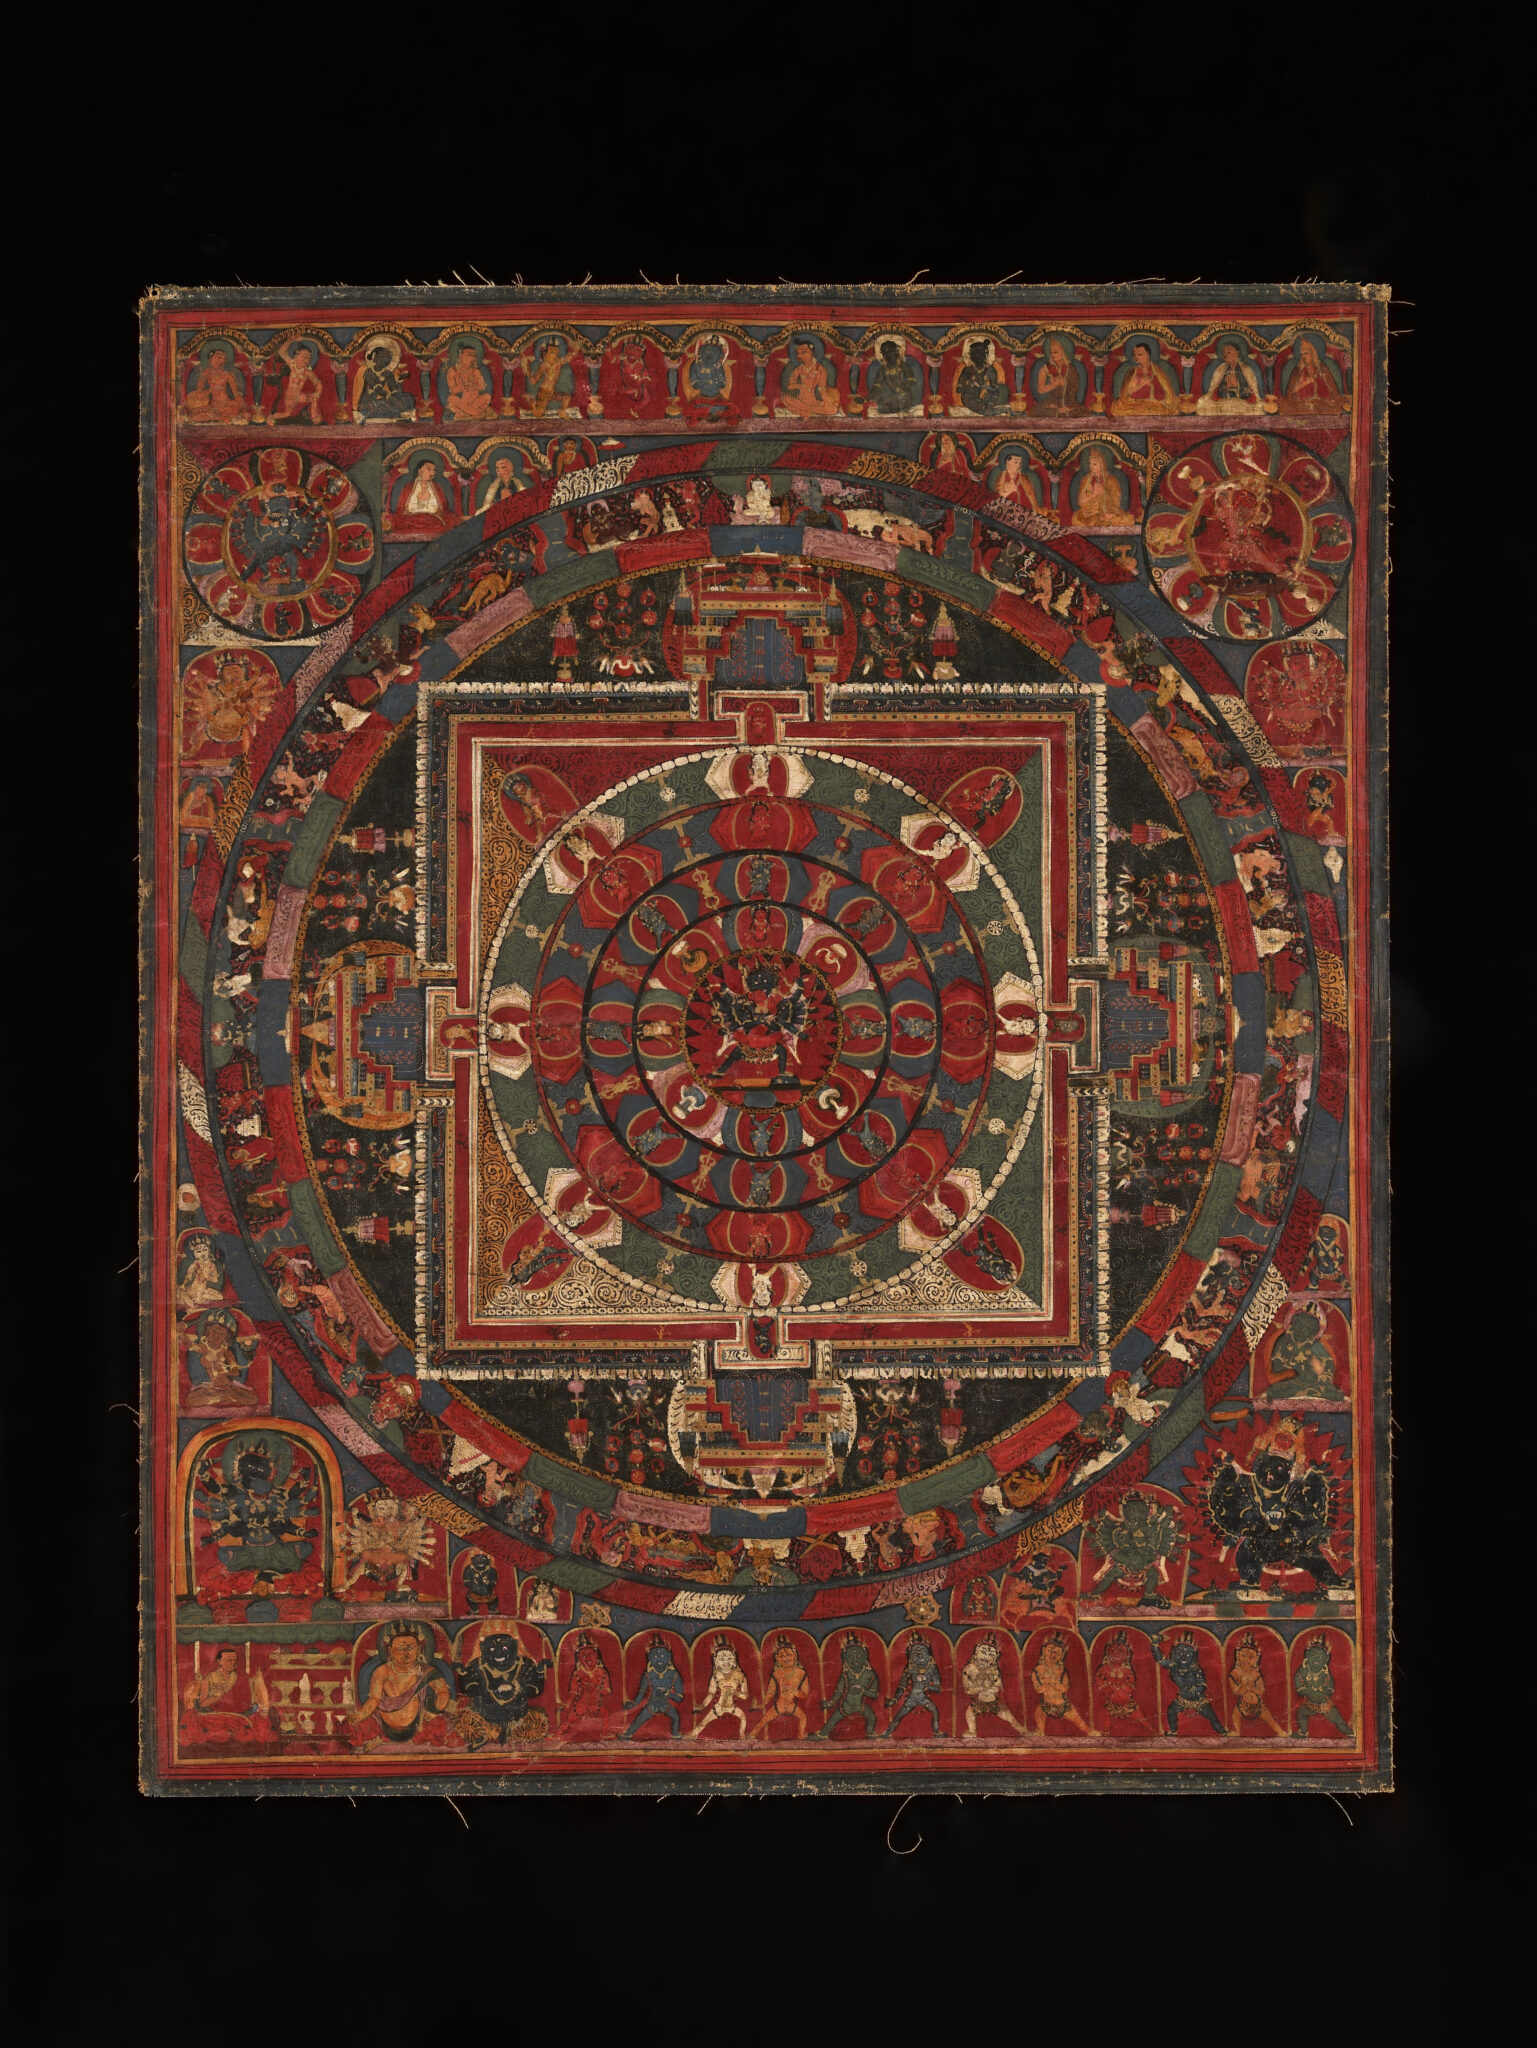 Mandala in rust-reds and greens featuring vajra-pointed inner circle and deity portraits at corners